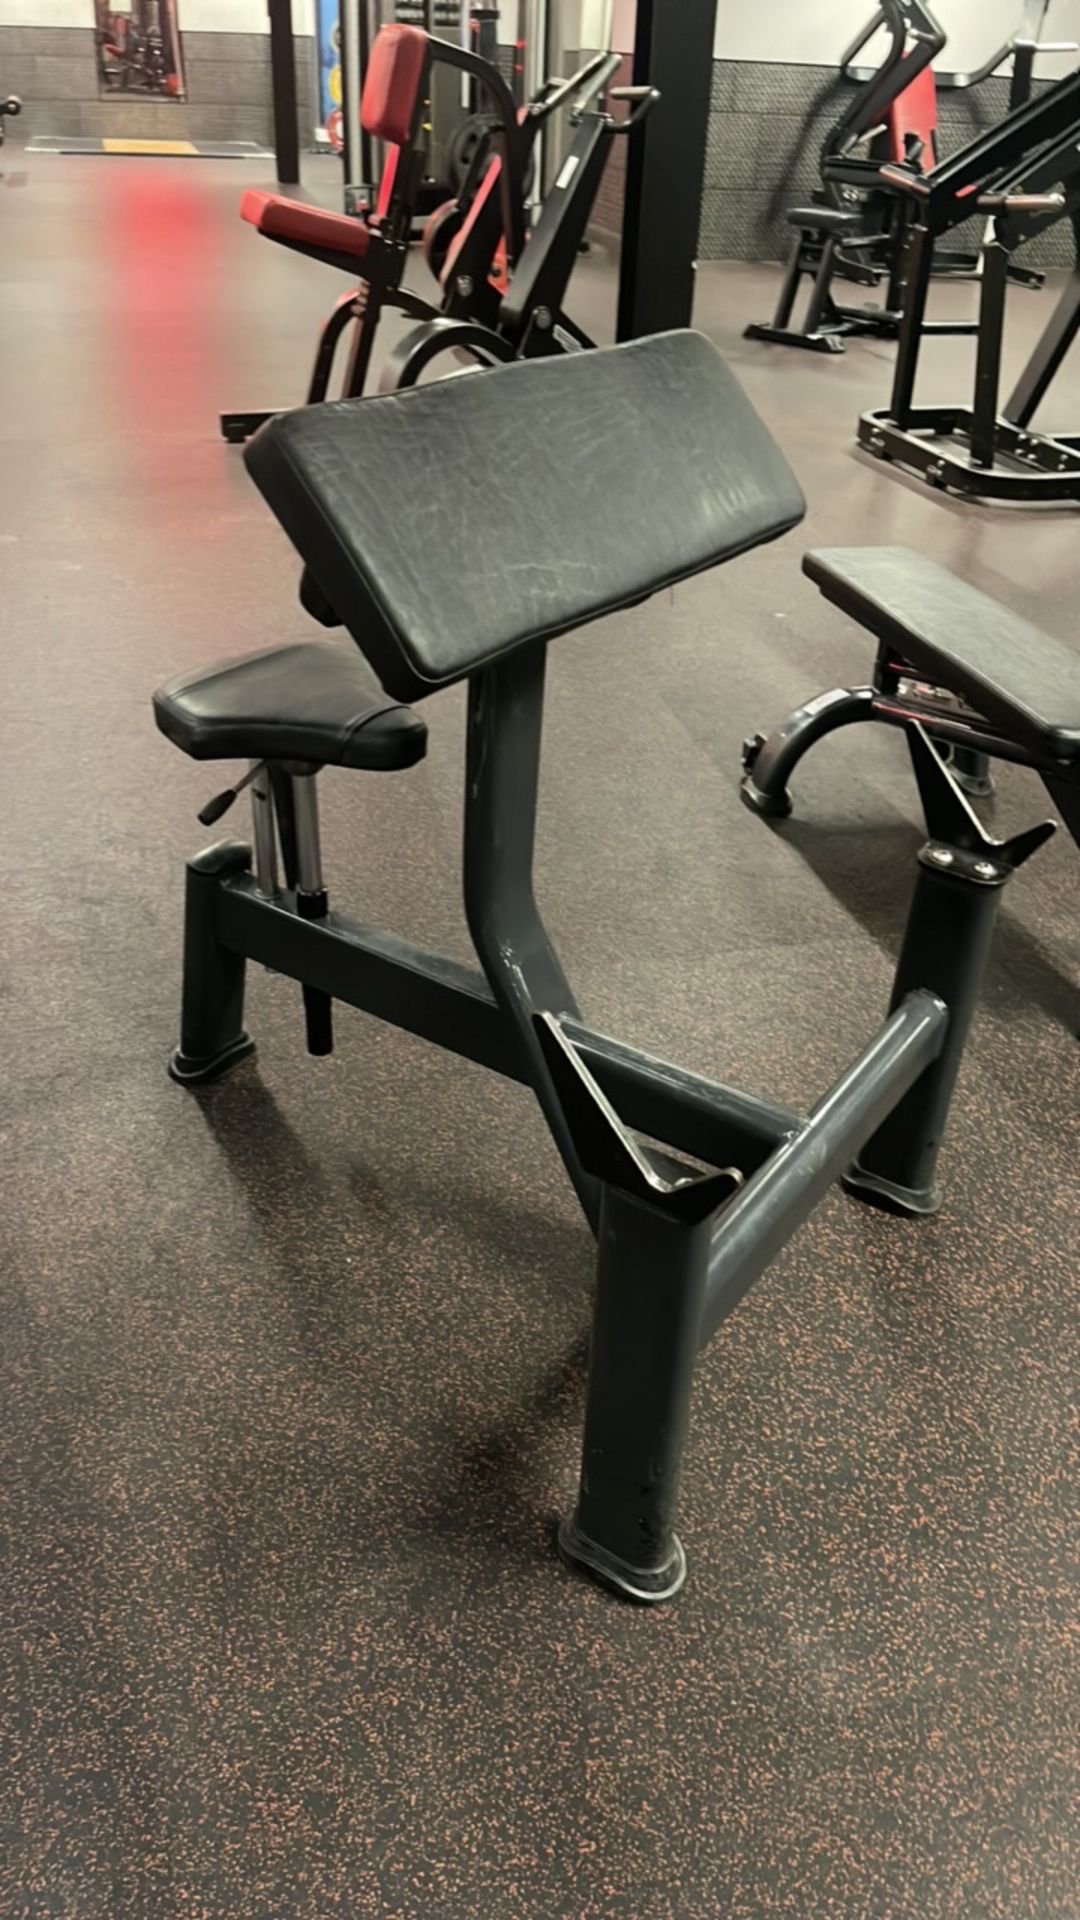 Preacher Curl Station - Image 3 of 5